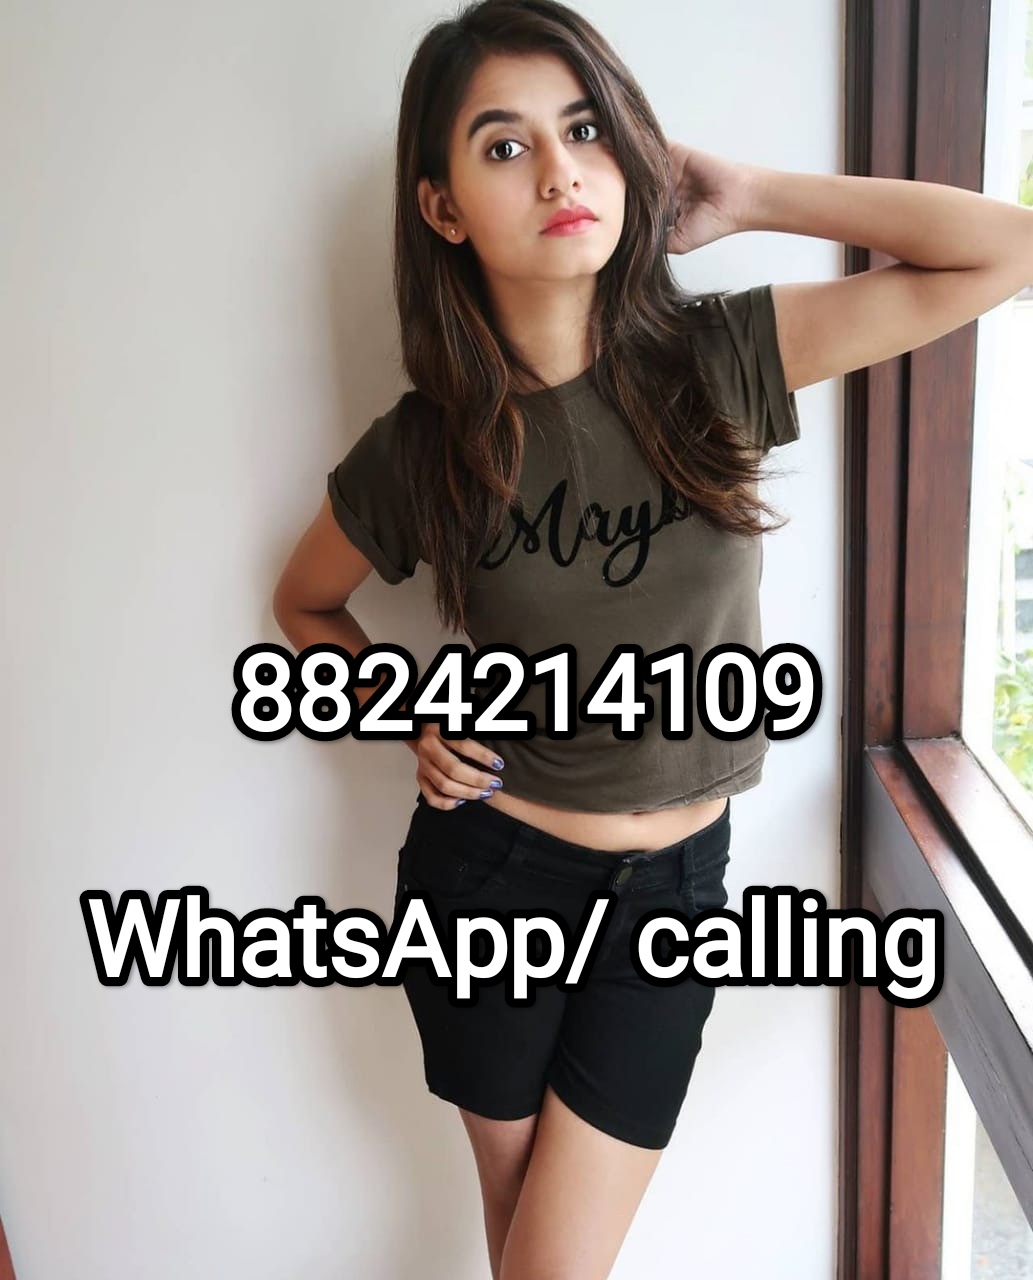 Bangalore High profile girls with safe and satisfaction service 